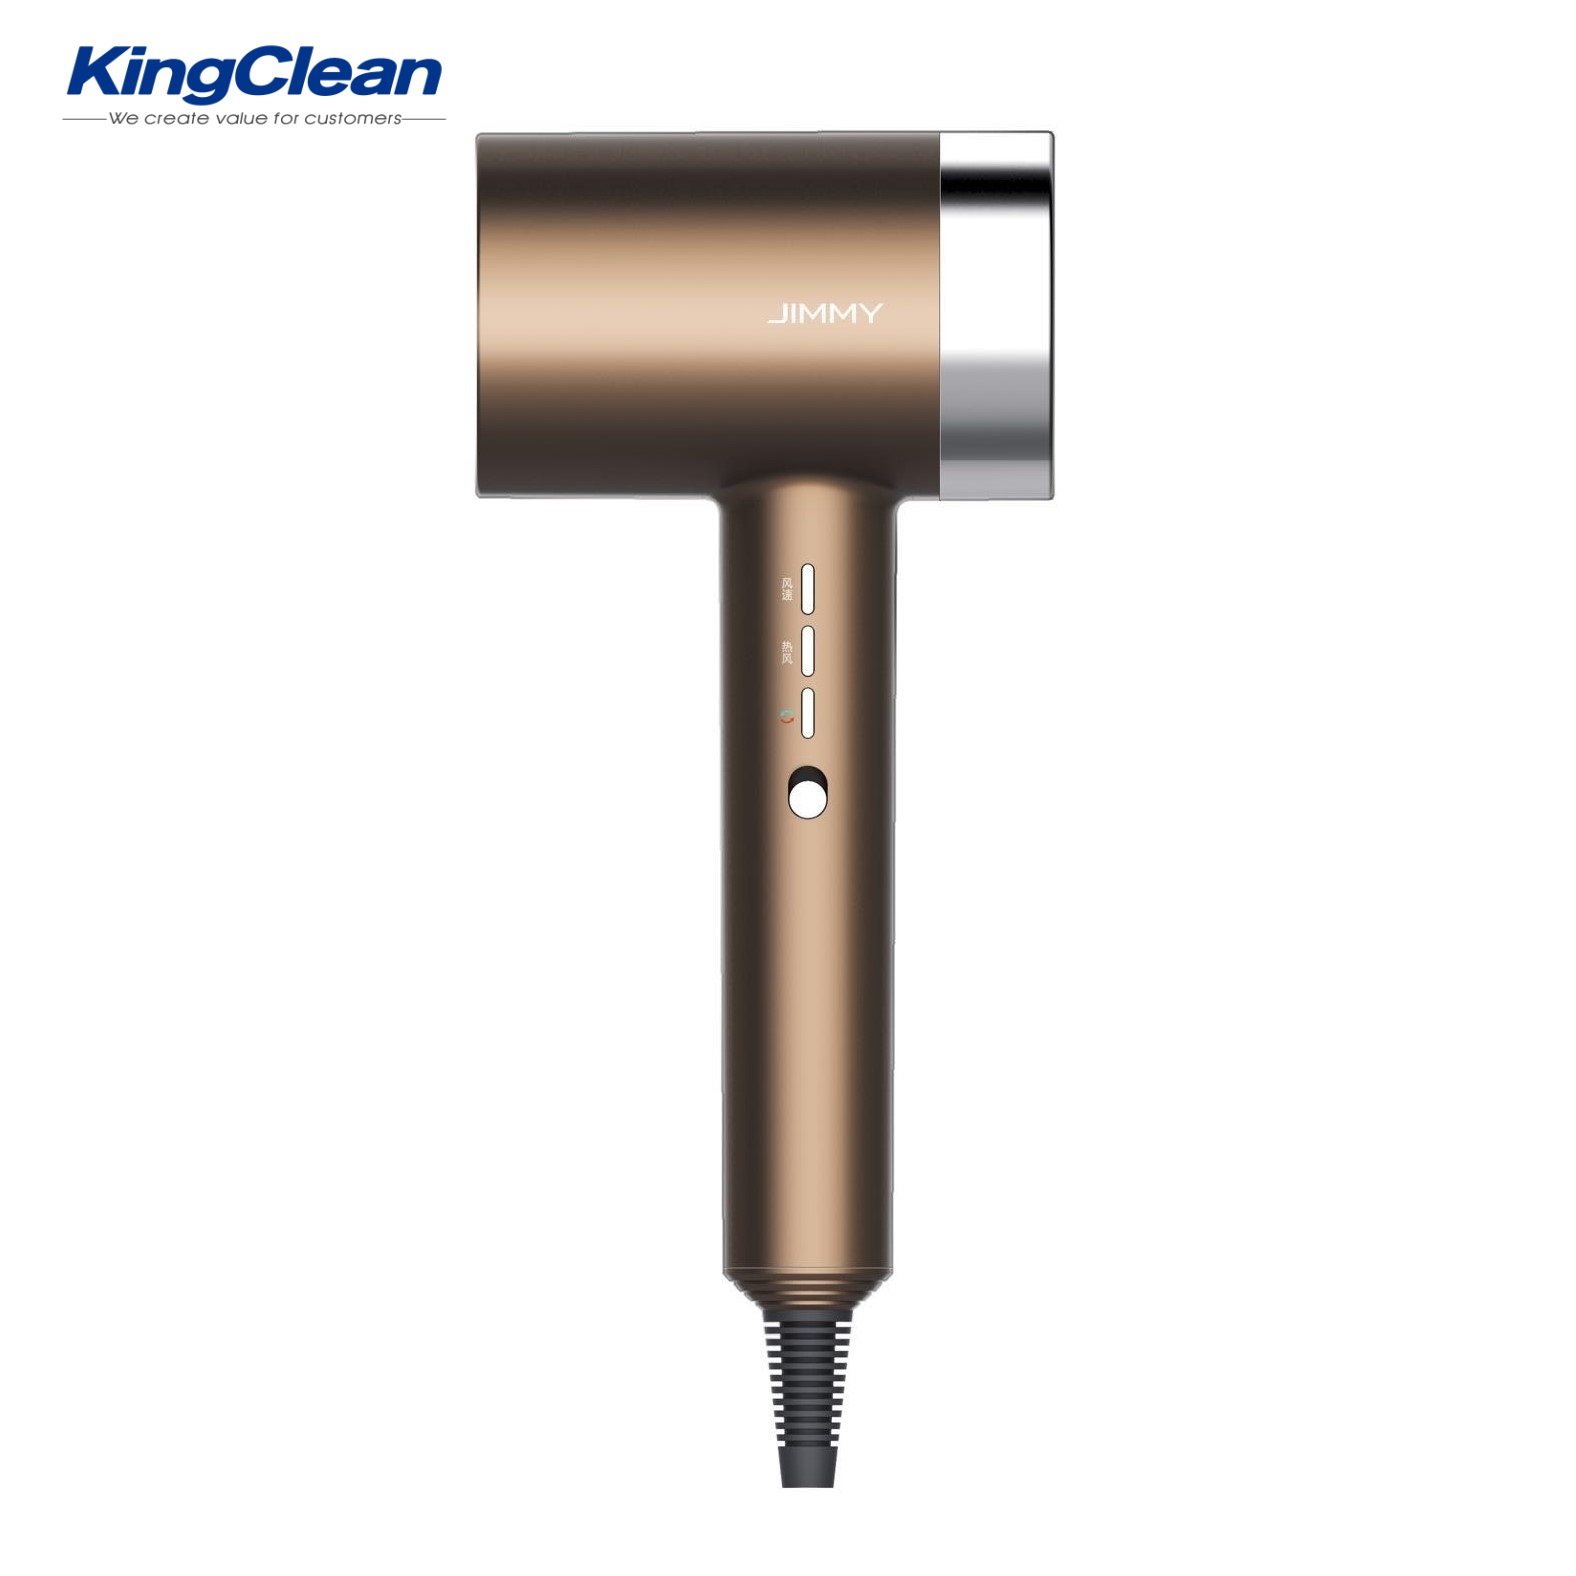 Hair dryer with BLDC motor